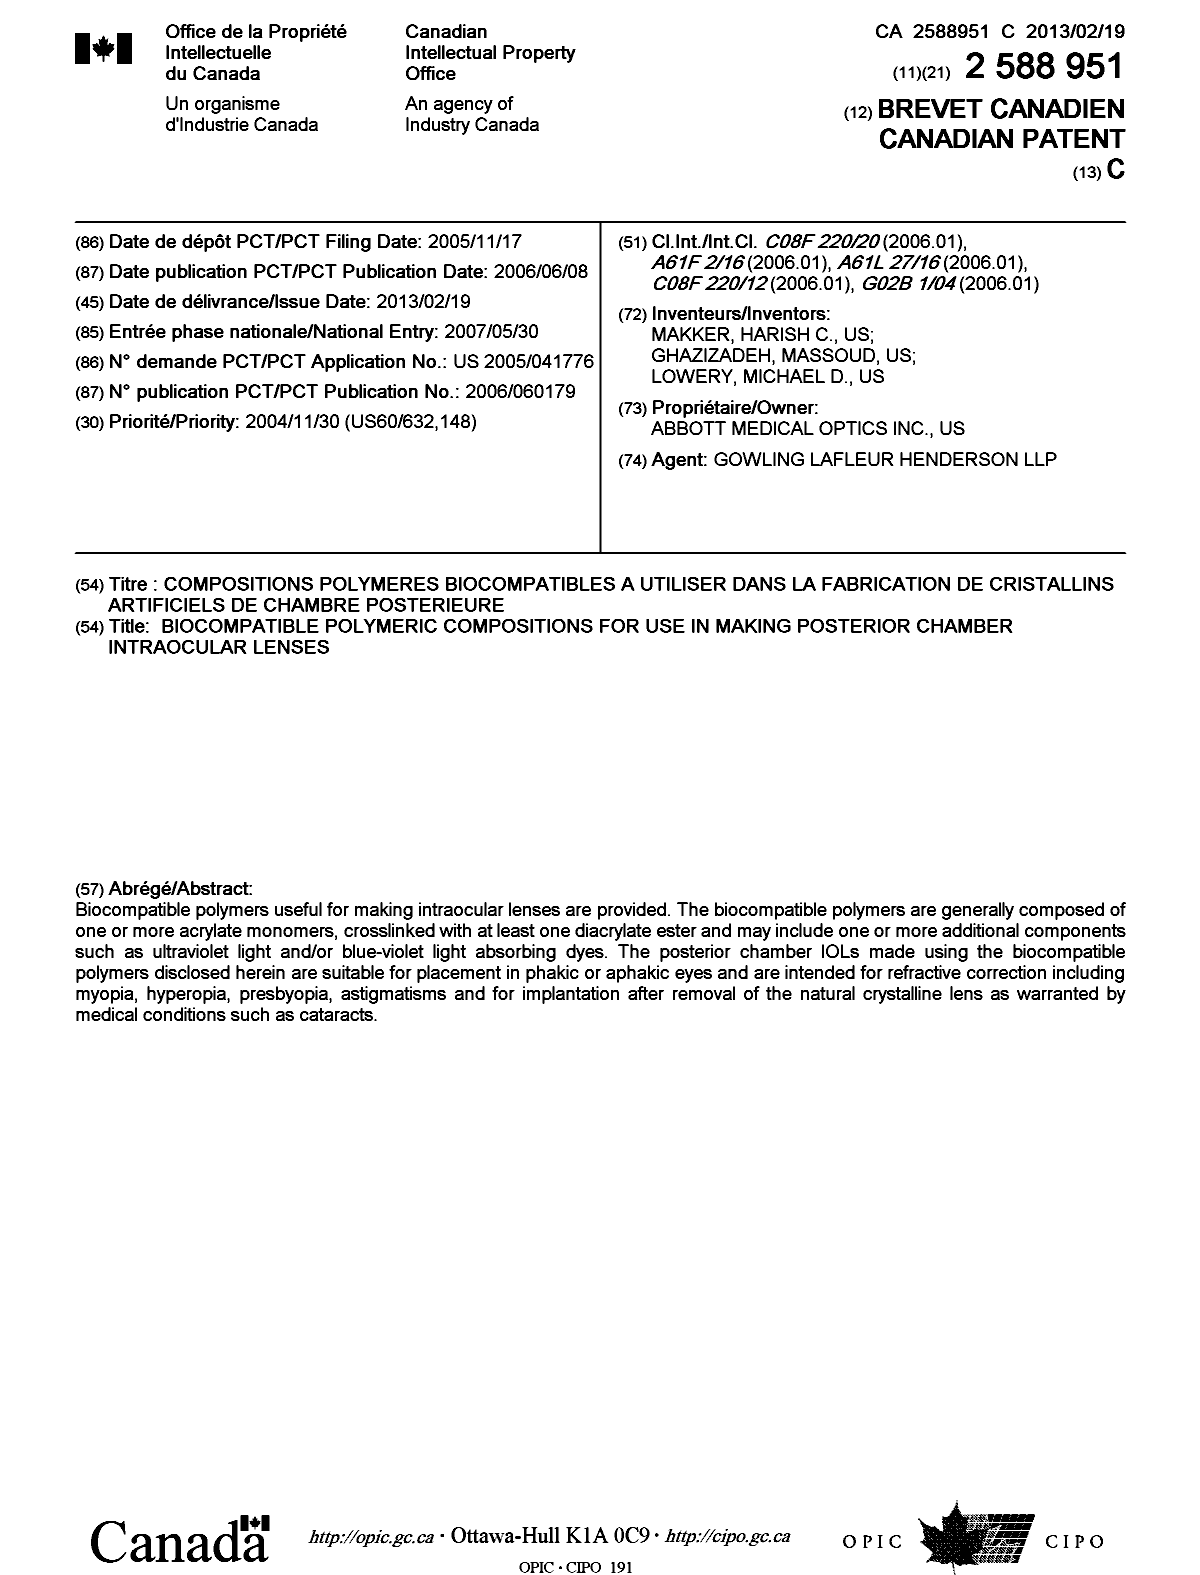 Canadian Patent Document 2588951. Cover Page 20130124. Image 1 of 1